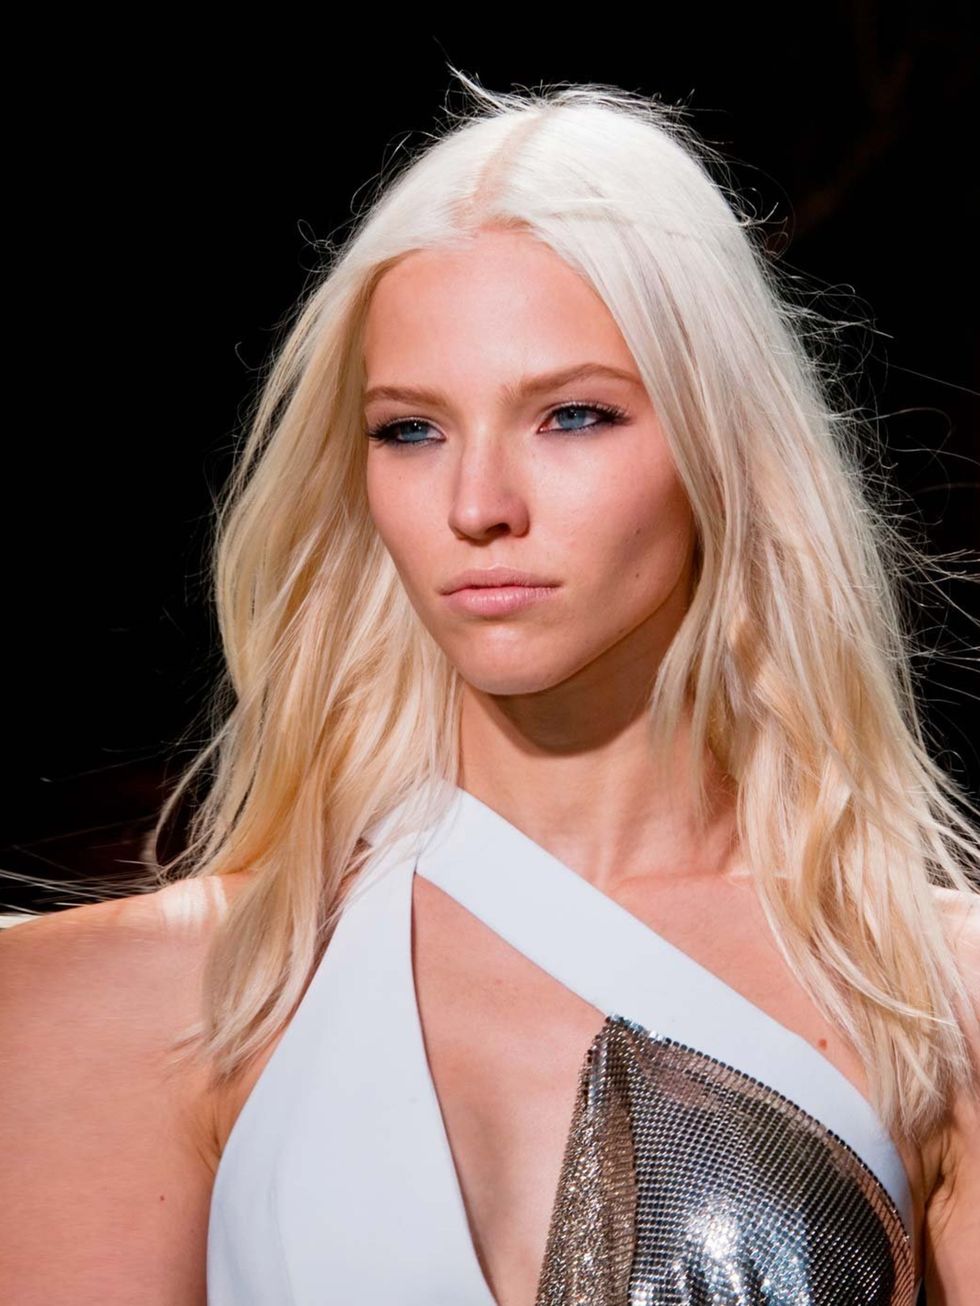 <p><strong>Sasha Luss</strong> at <a href="http://www.elleuk.com/catwalk/designer-a-z/versace/spring-summer-2014">Versace</a>.</p><p>'For me, the face of SS14. The newly super-blonde Russian beauty walked every show that mattered. And whatta walk she has!